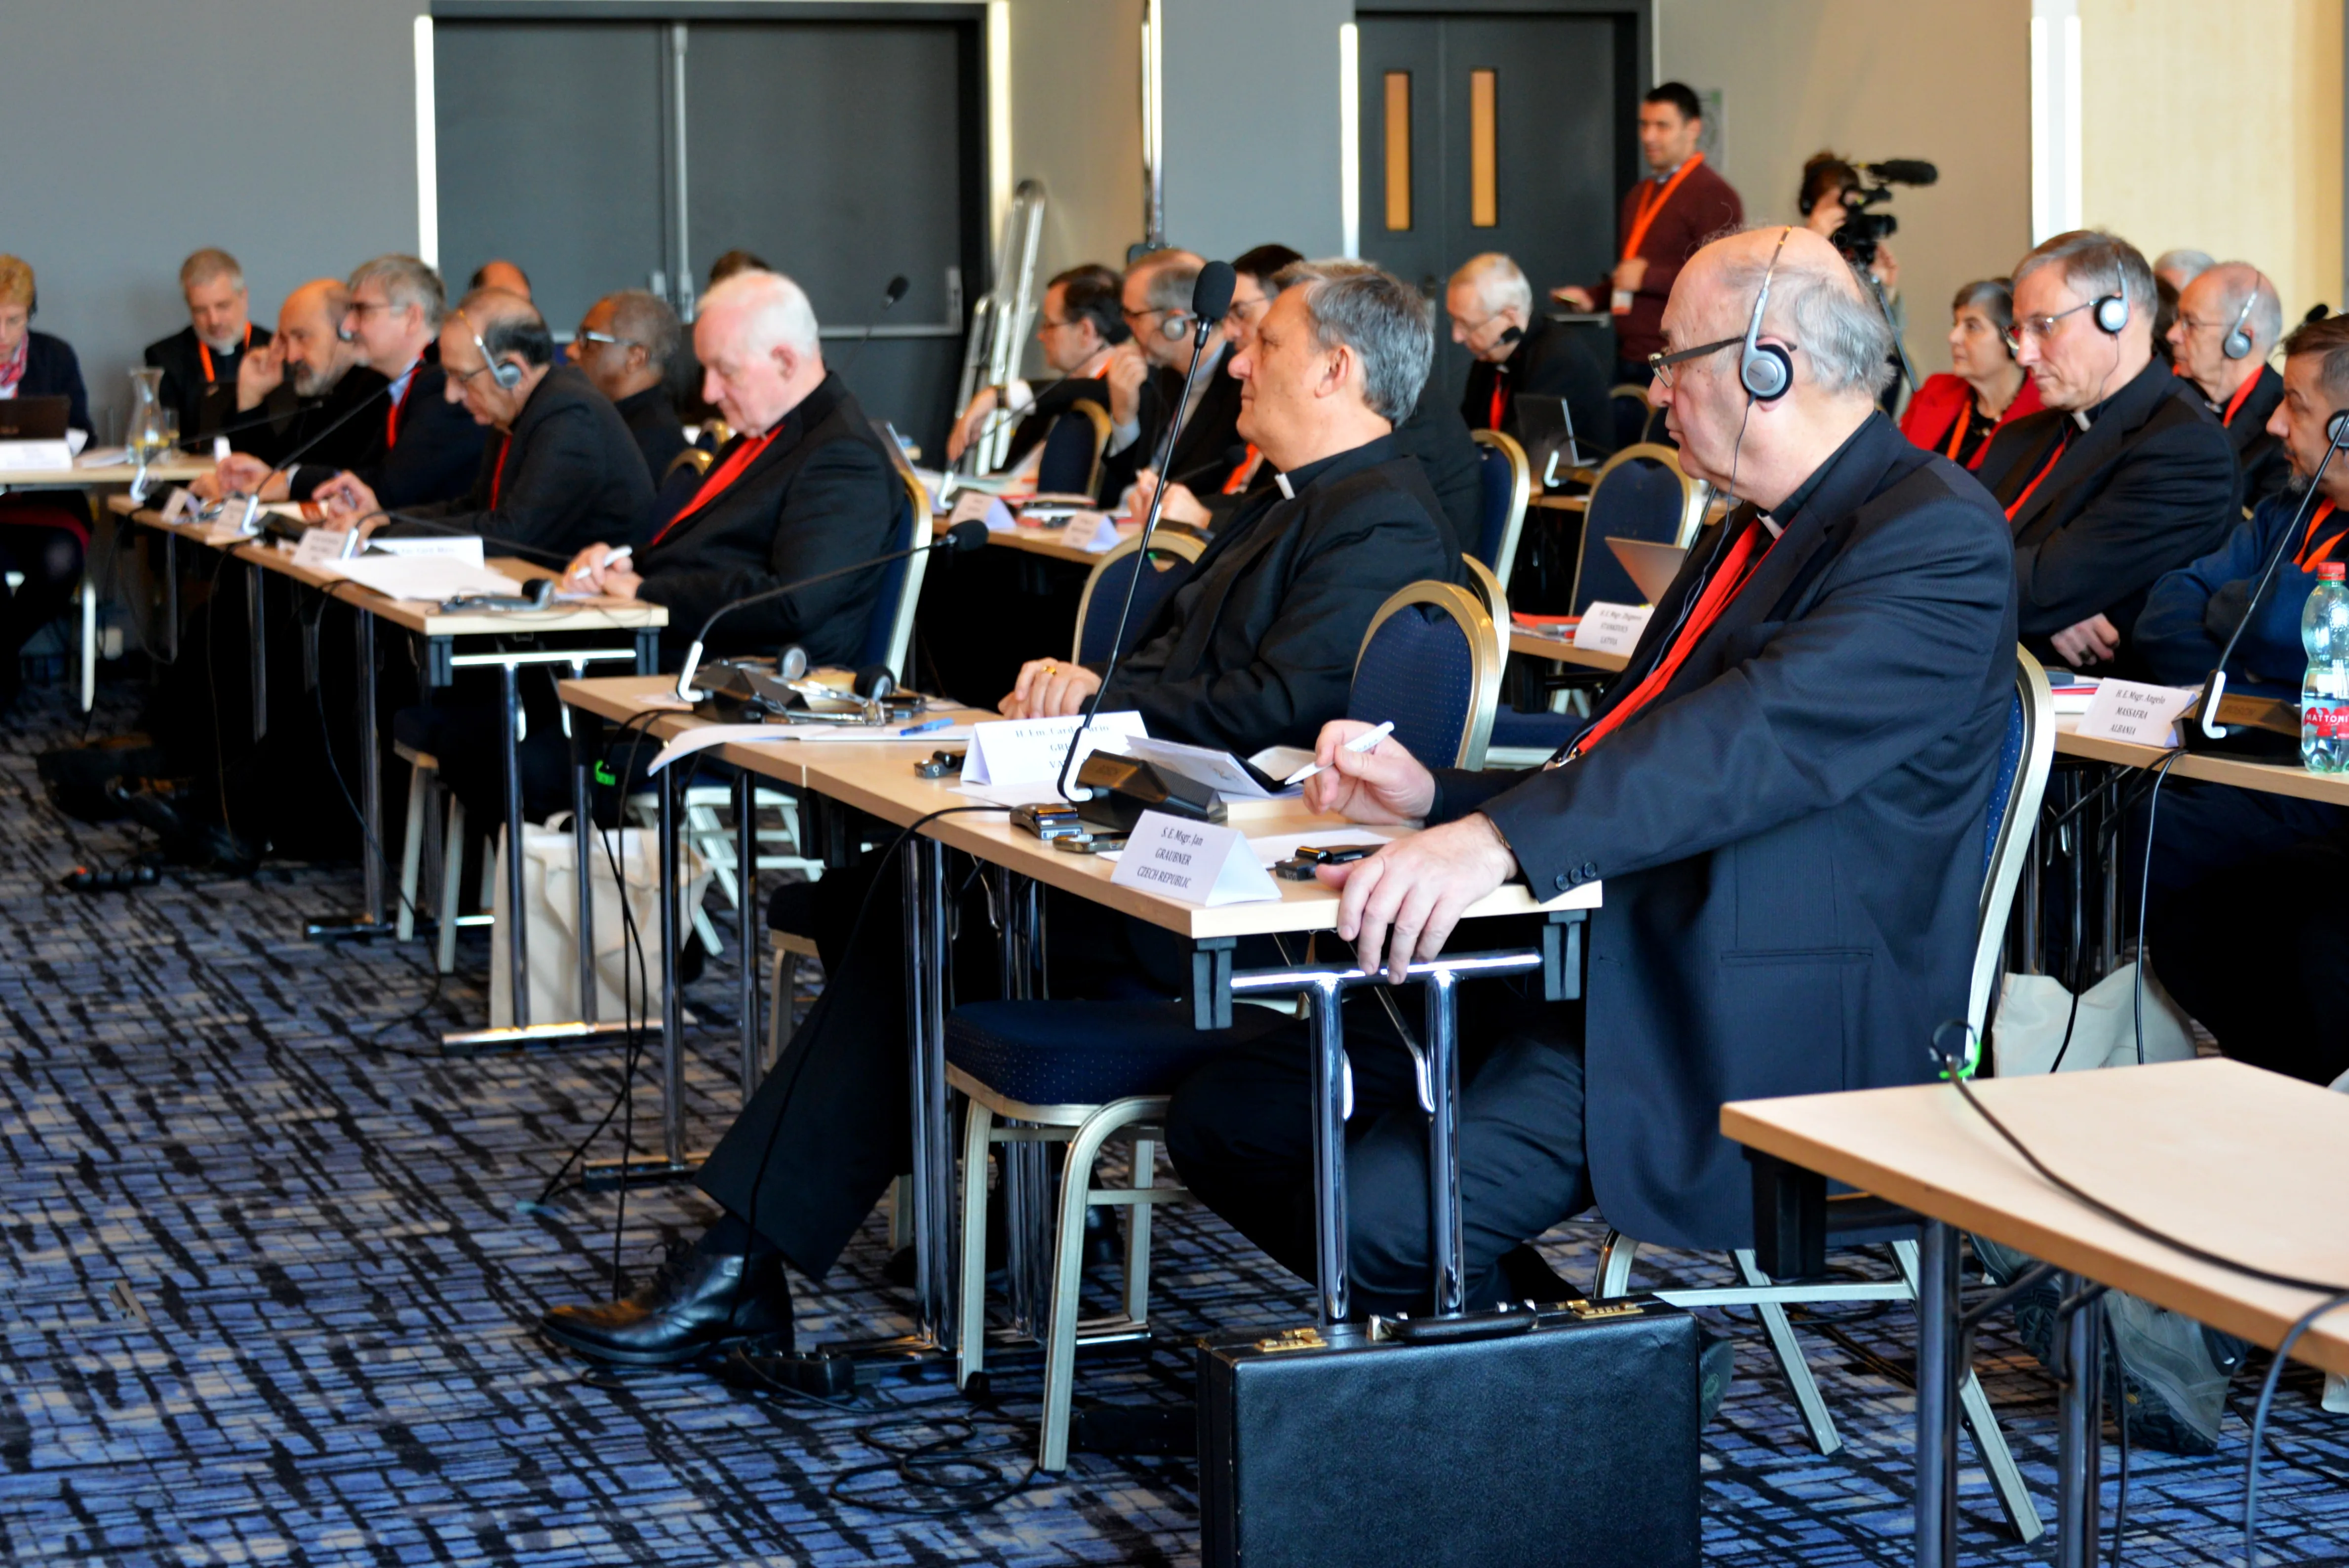 Synod delegates listen to presentations at the European Continental Assembly in Prague on Feb. 7, 2023.?w=200&h=150